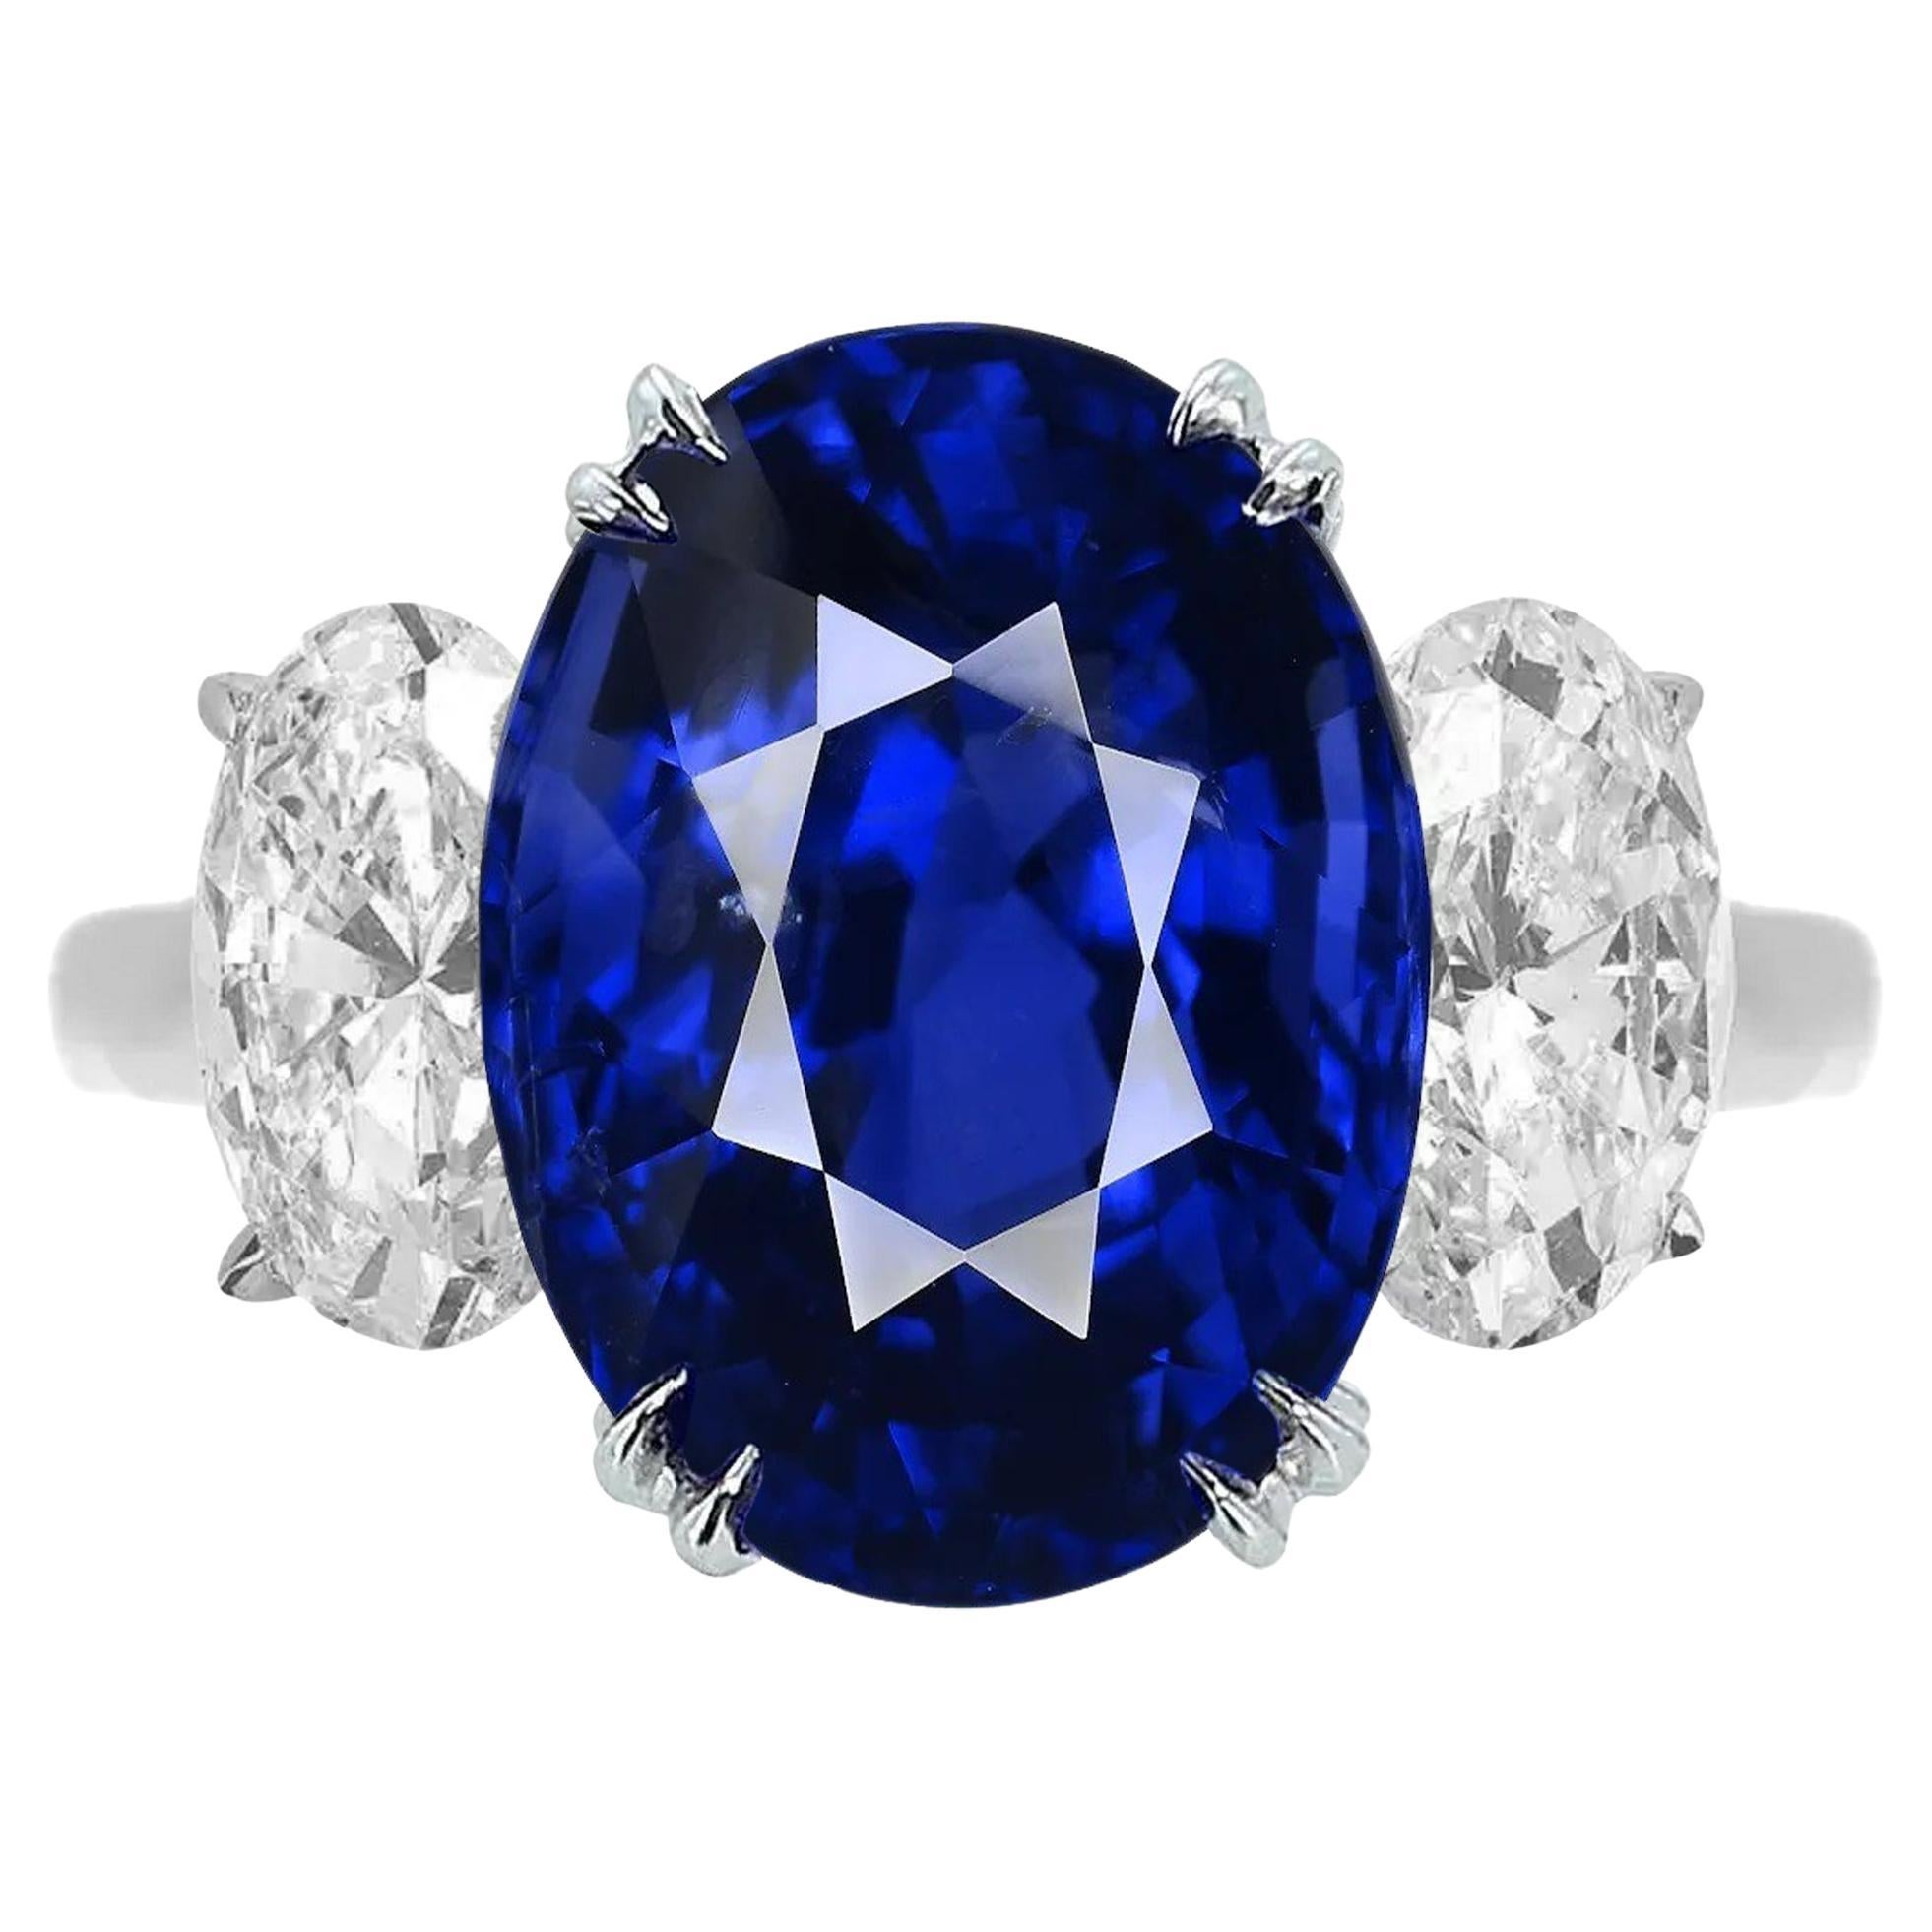 No Heat Gia Grs Certified 4 Carat Blue Oval Sapphire Diamond Ring For Sale At 1stdibs 4 Carat